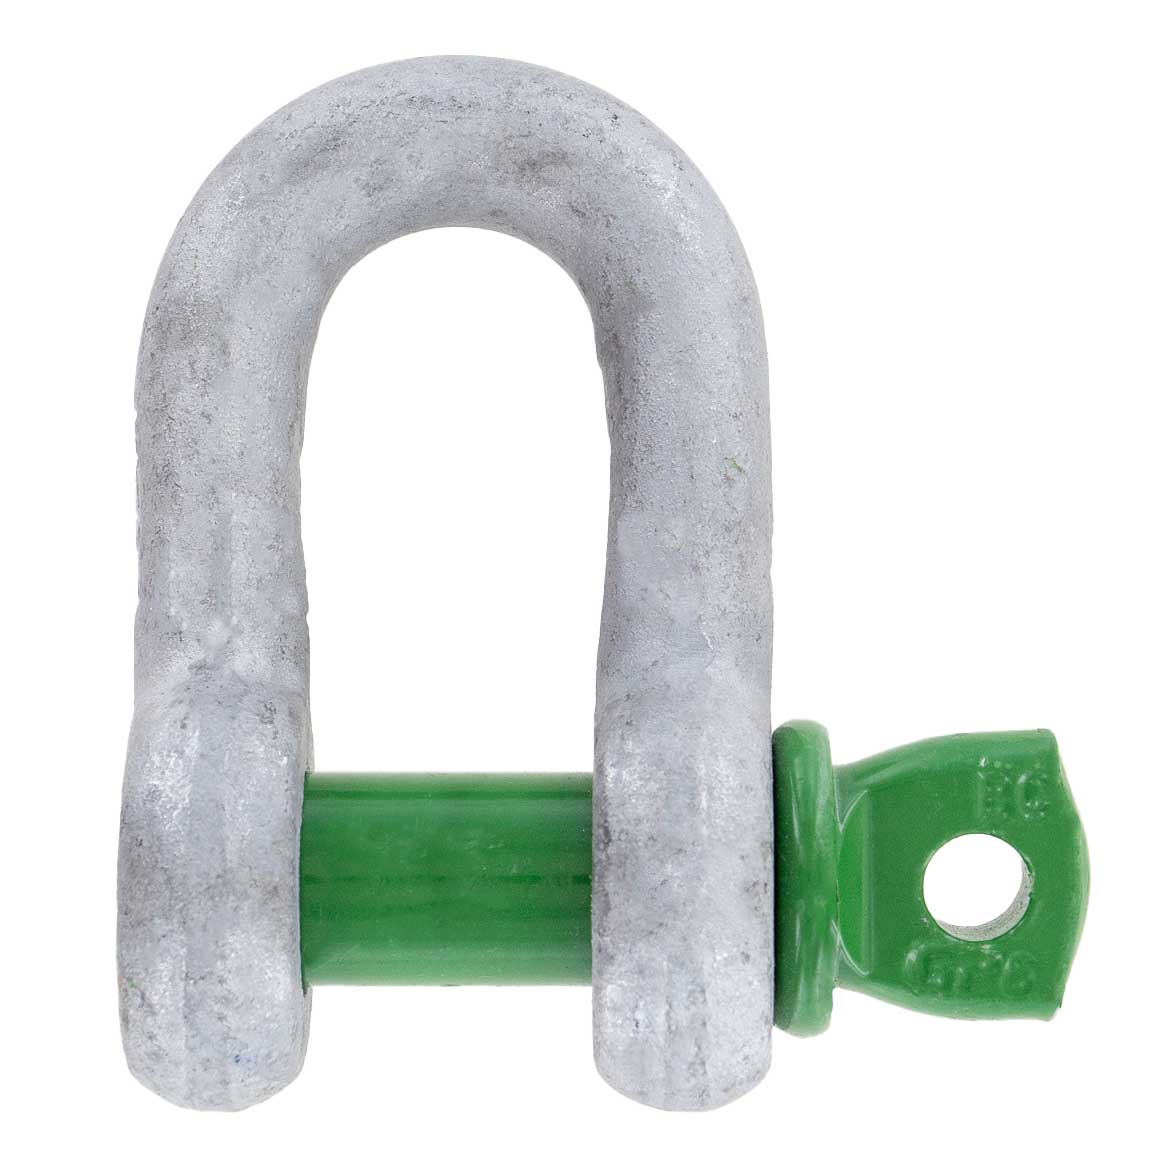 1/2" Van Beest Green Pin® Screw Pin Chain Shackle | G-4151 - 2 Ton primary image